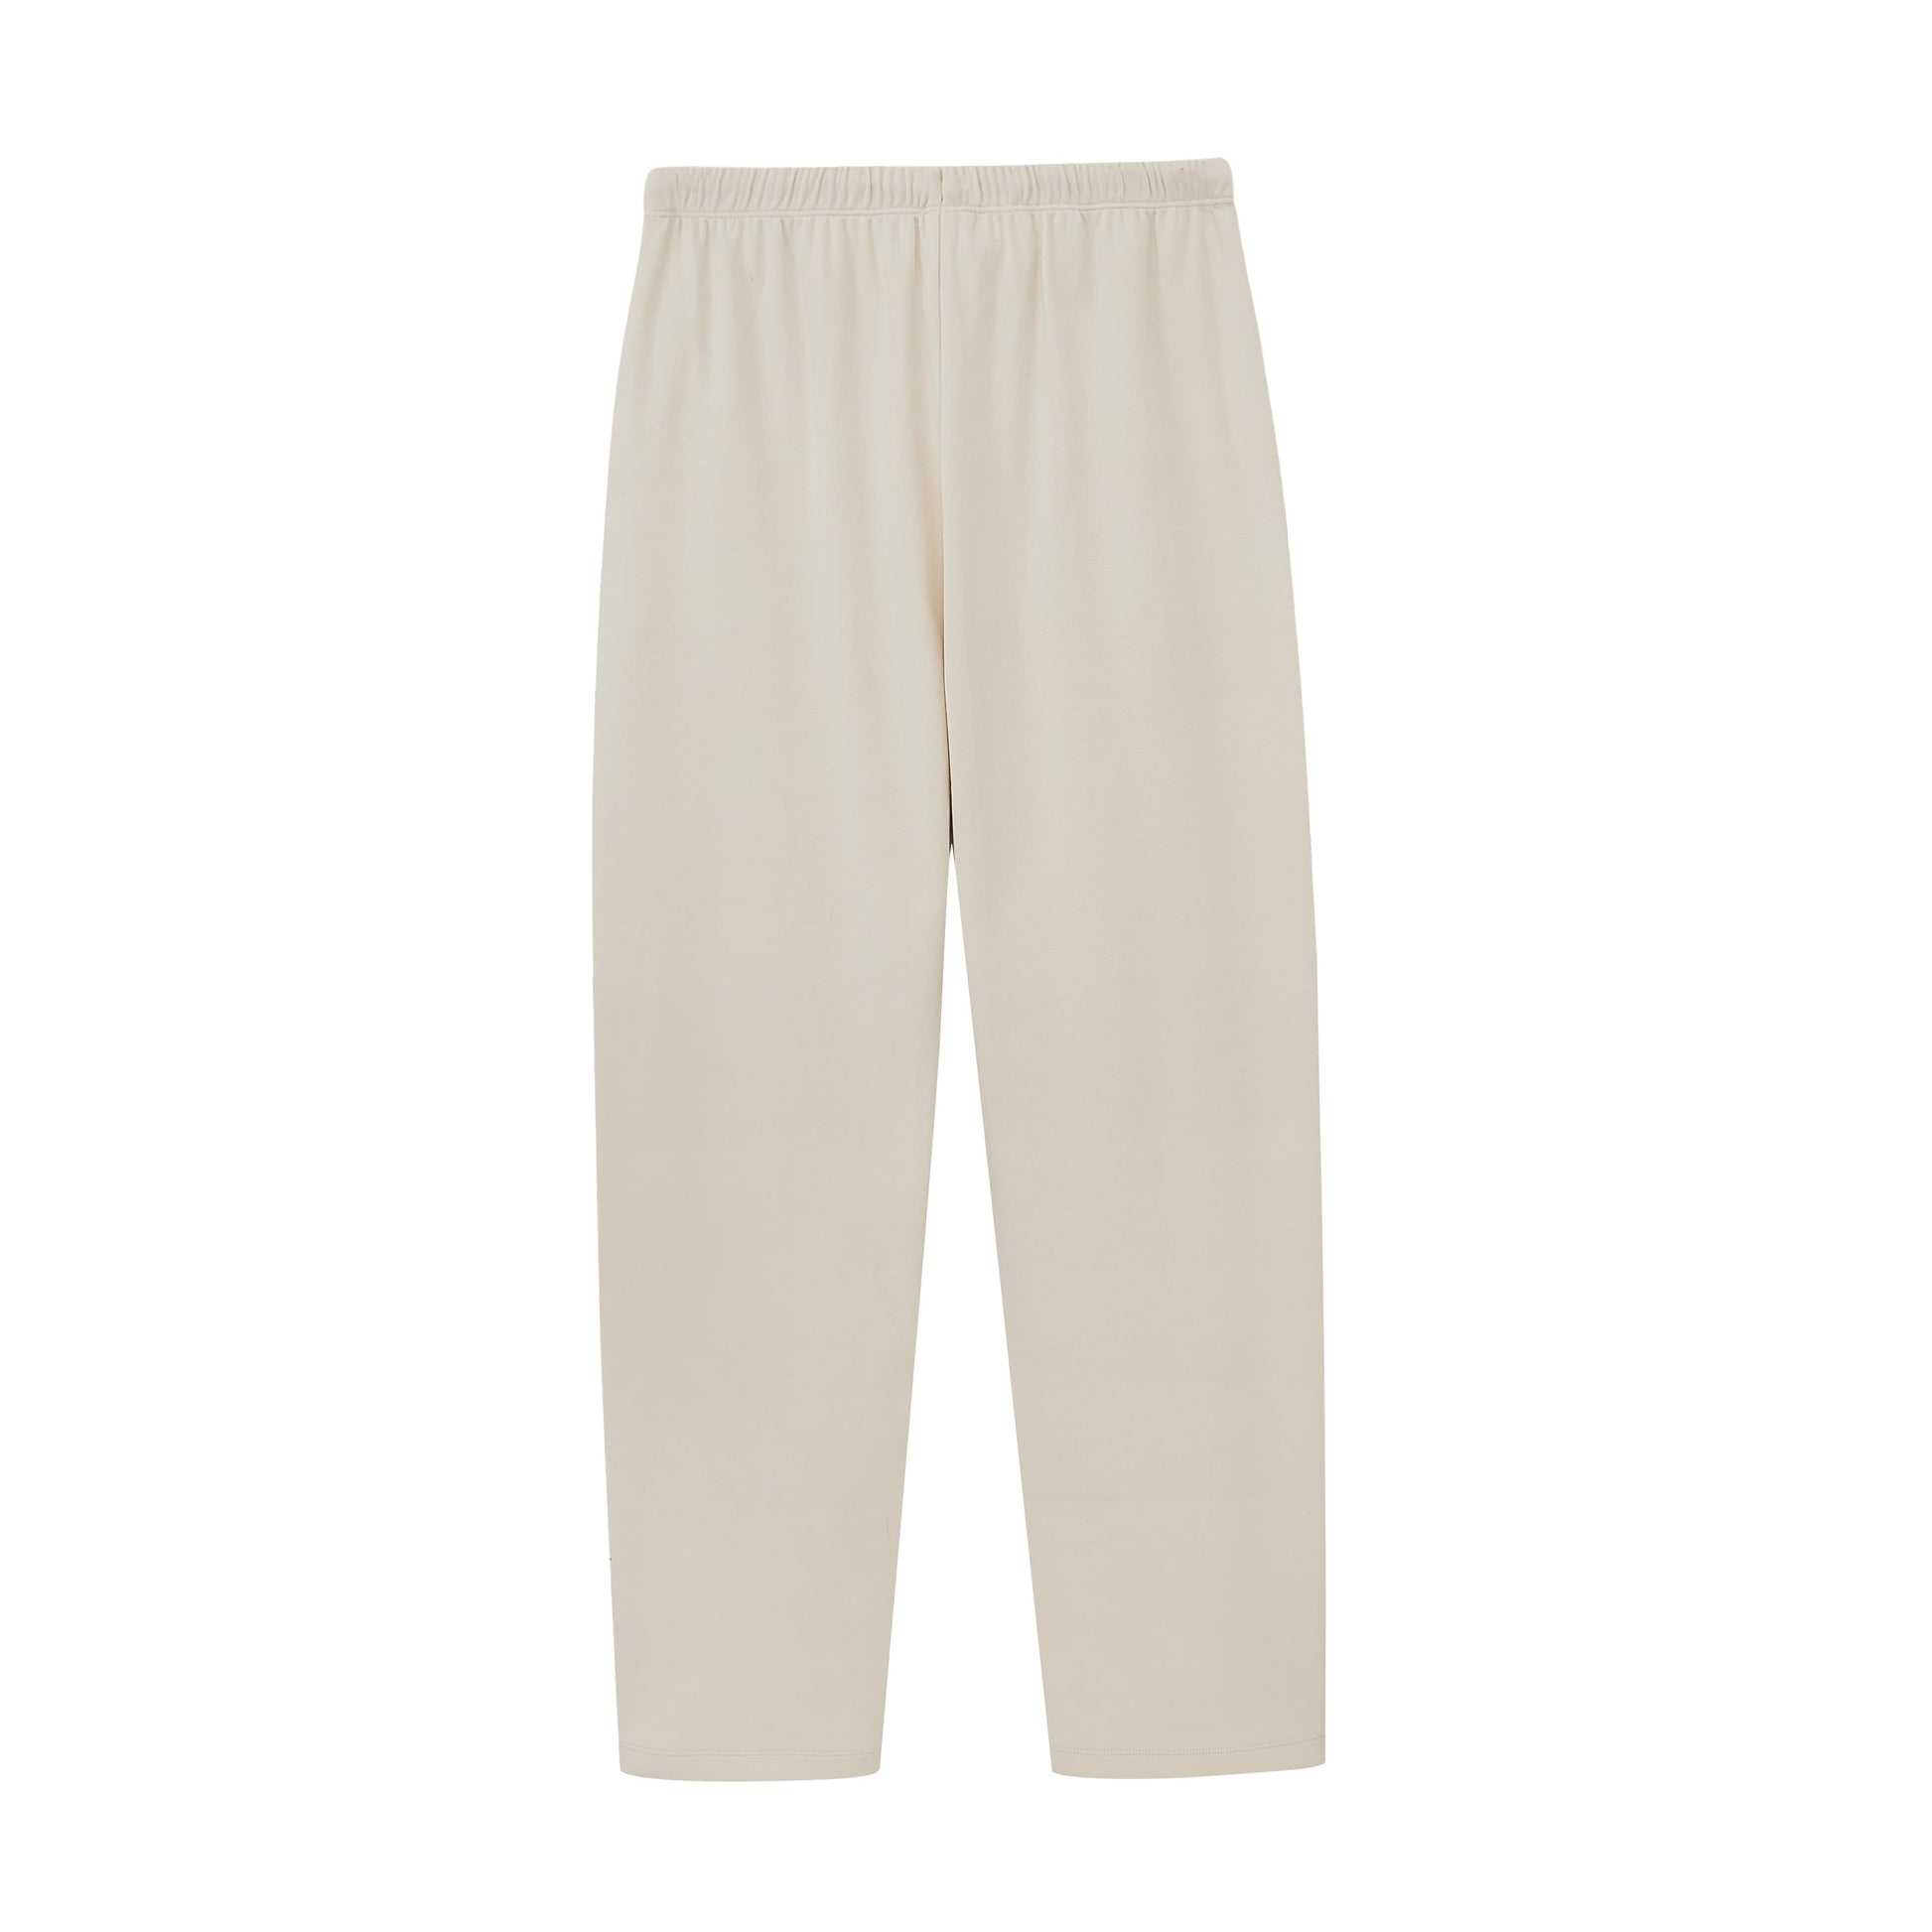 a pair of cream color pants 